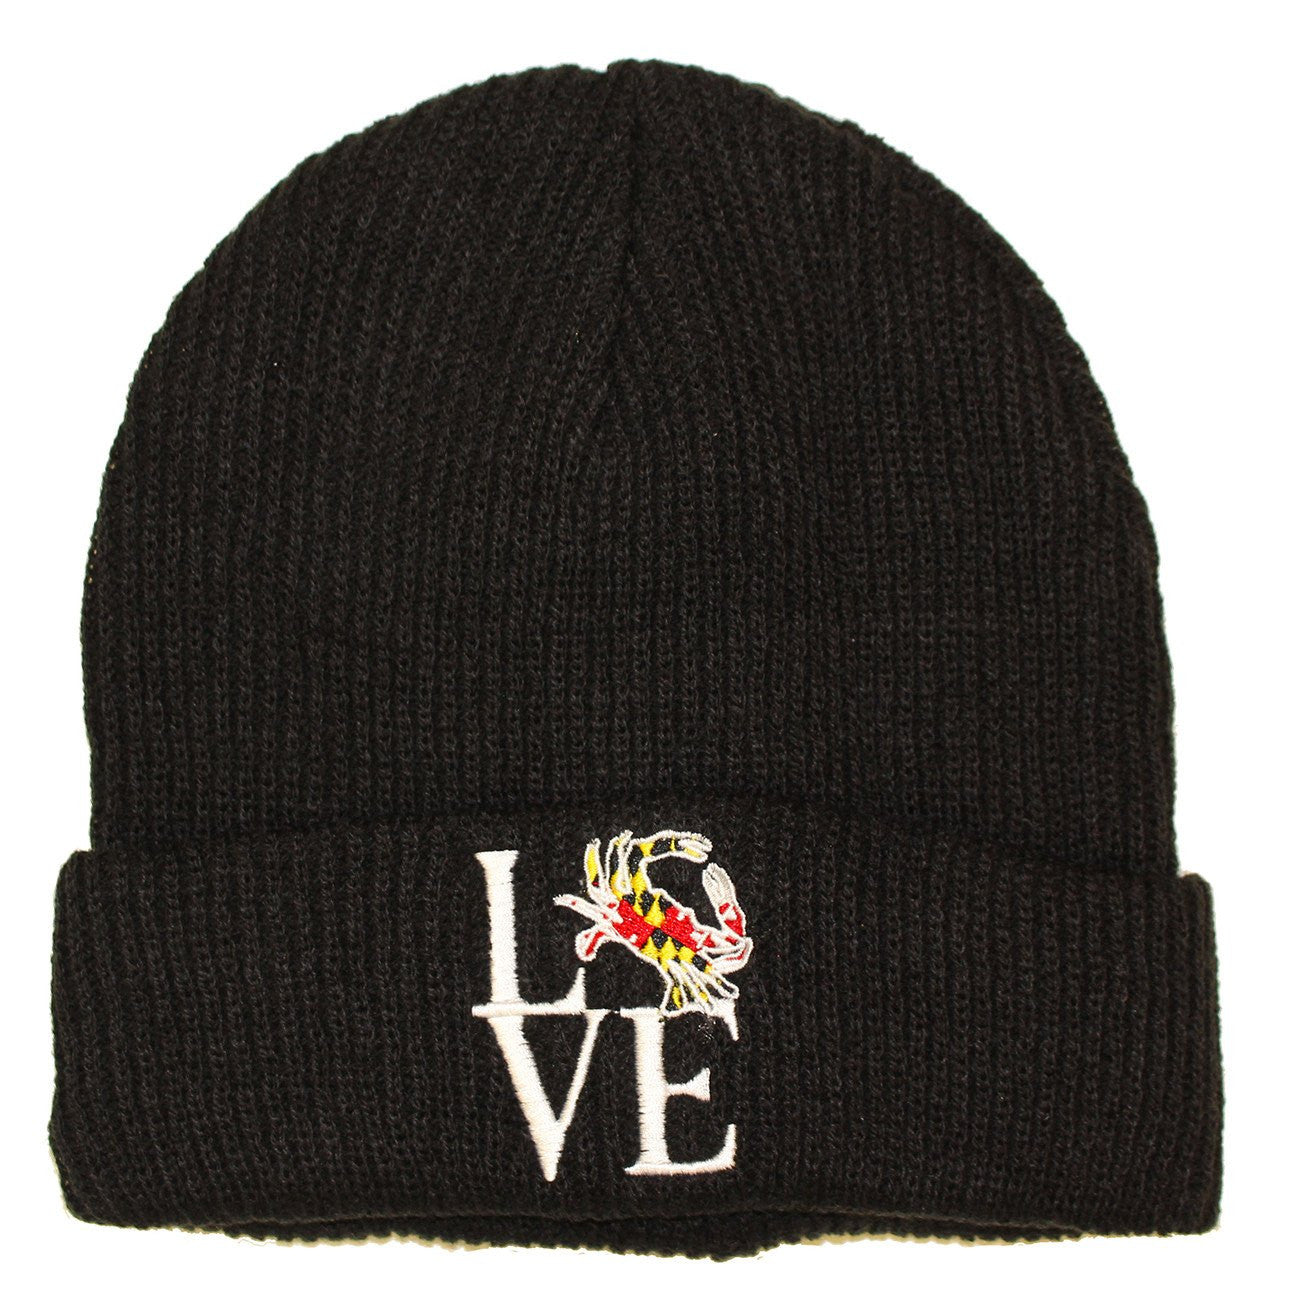 Maryland Crabby Love (Black) / Slouchy Knit Beanie Cap - Route One Apparel